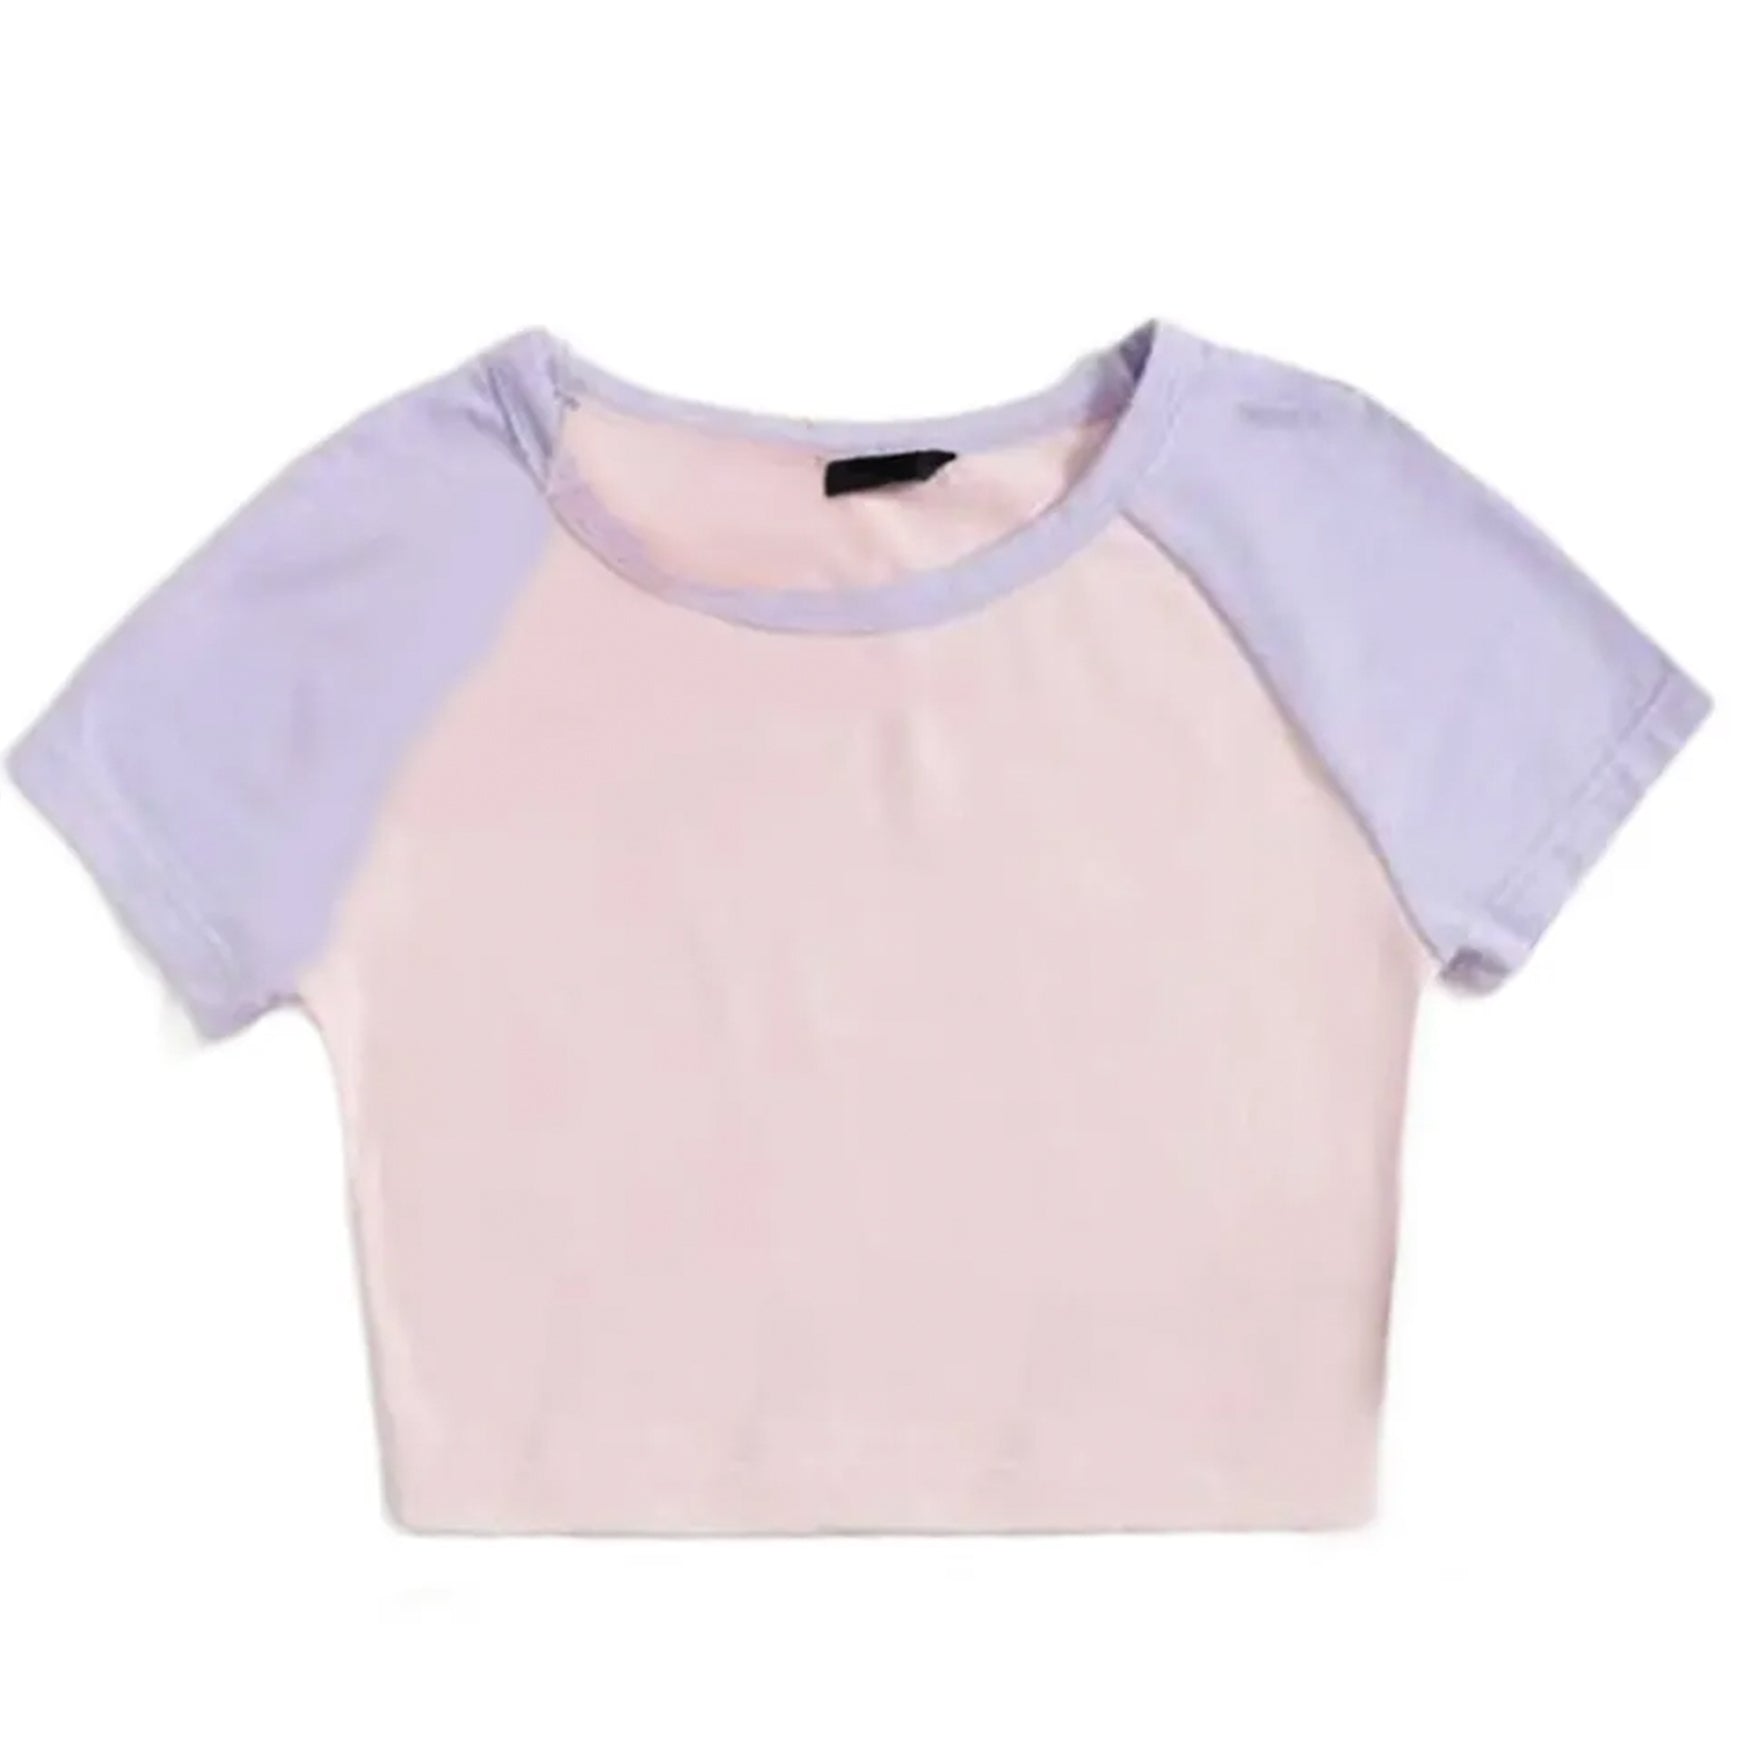 Khhalisi Rib Crop Tops Pink for Womens (S)